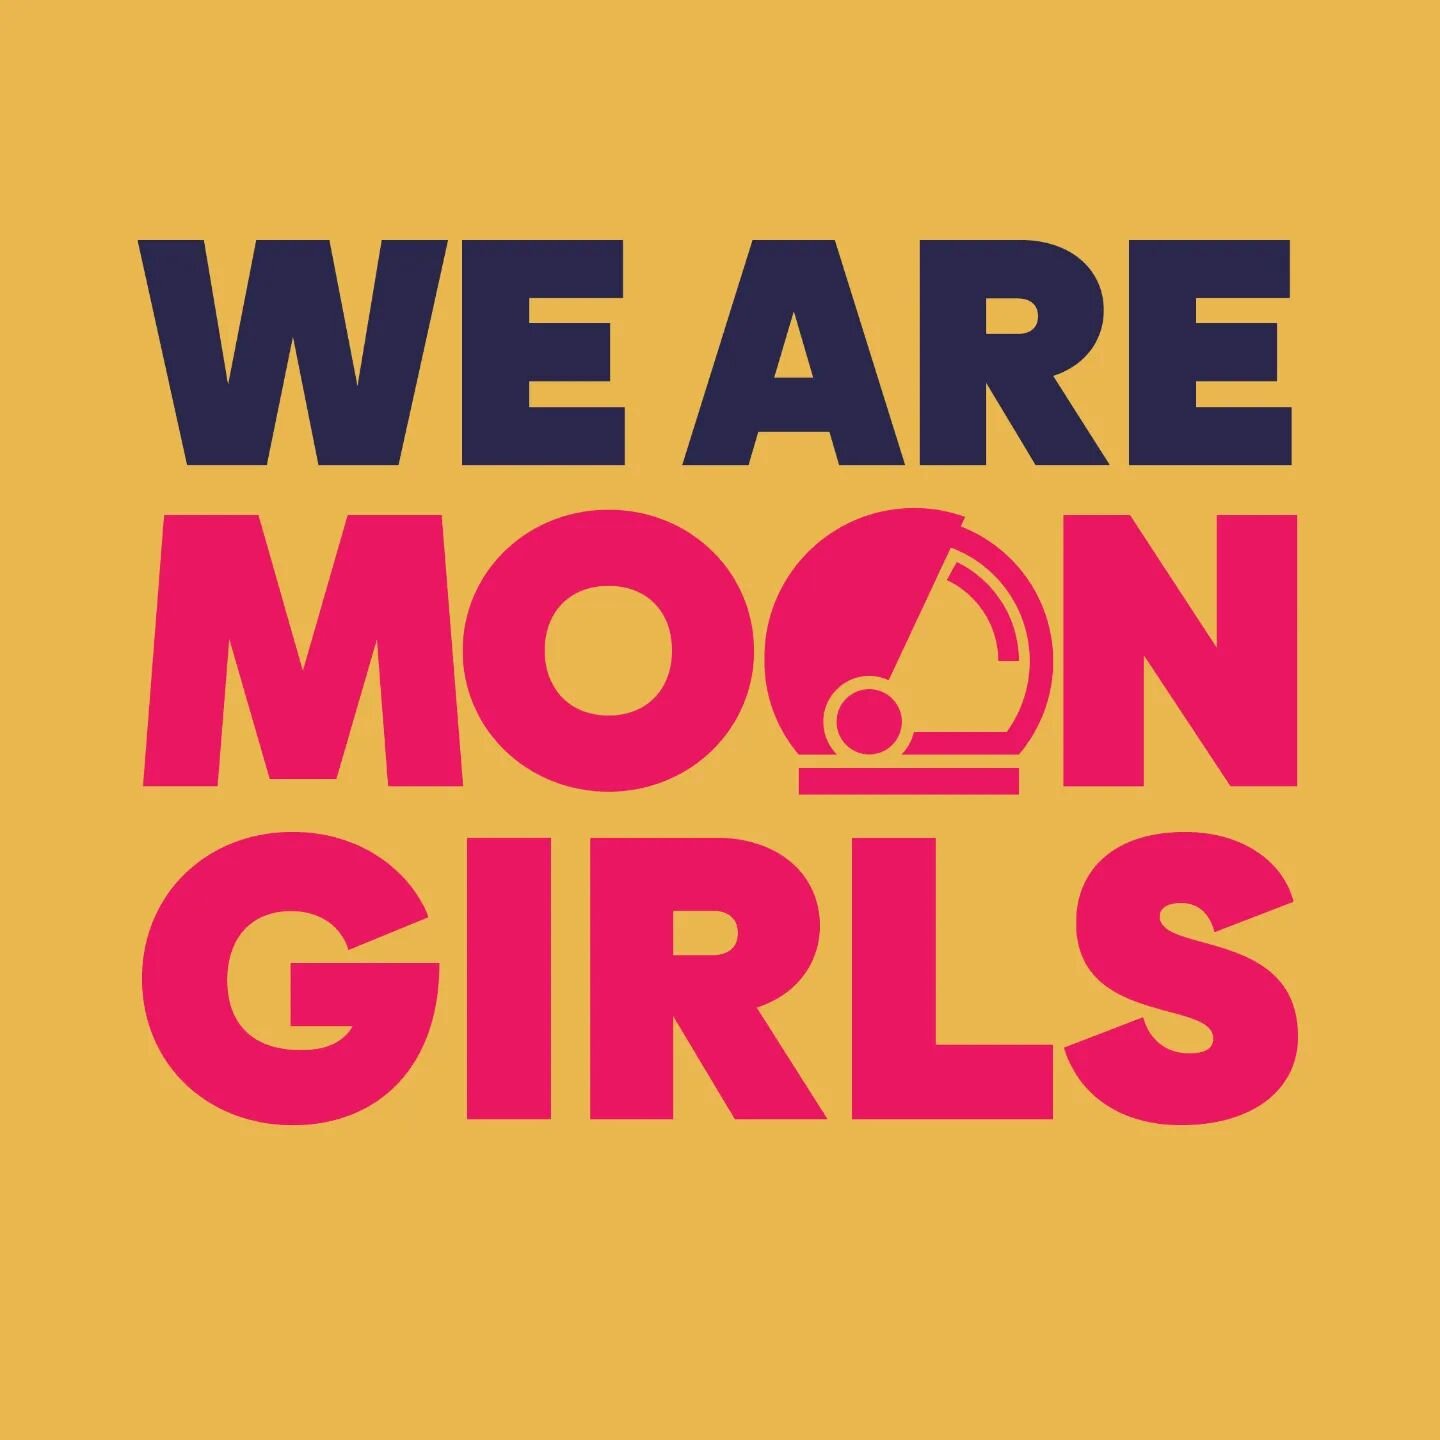 On #internationalwomensday, we honour our girls by changing our agency's name to #Moongirls for the day!

This is a testament to all the wonderful things they do, balancing home and work, and excelling at every role they play... as the friend, collea